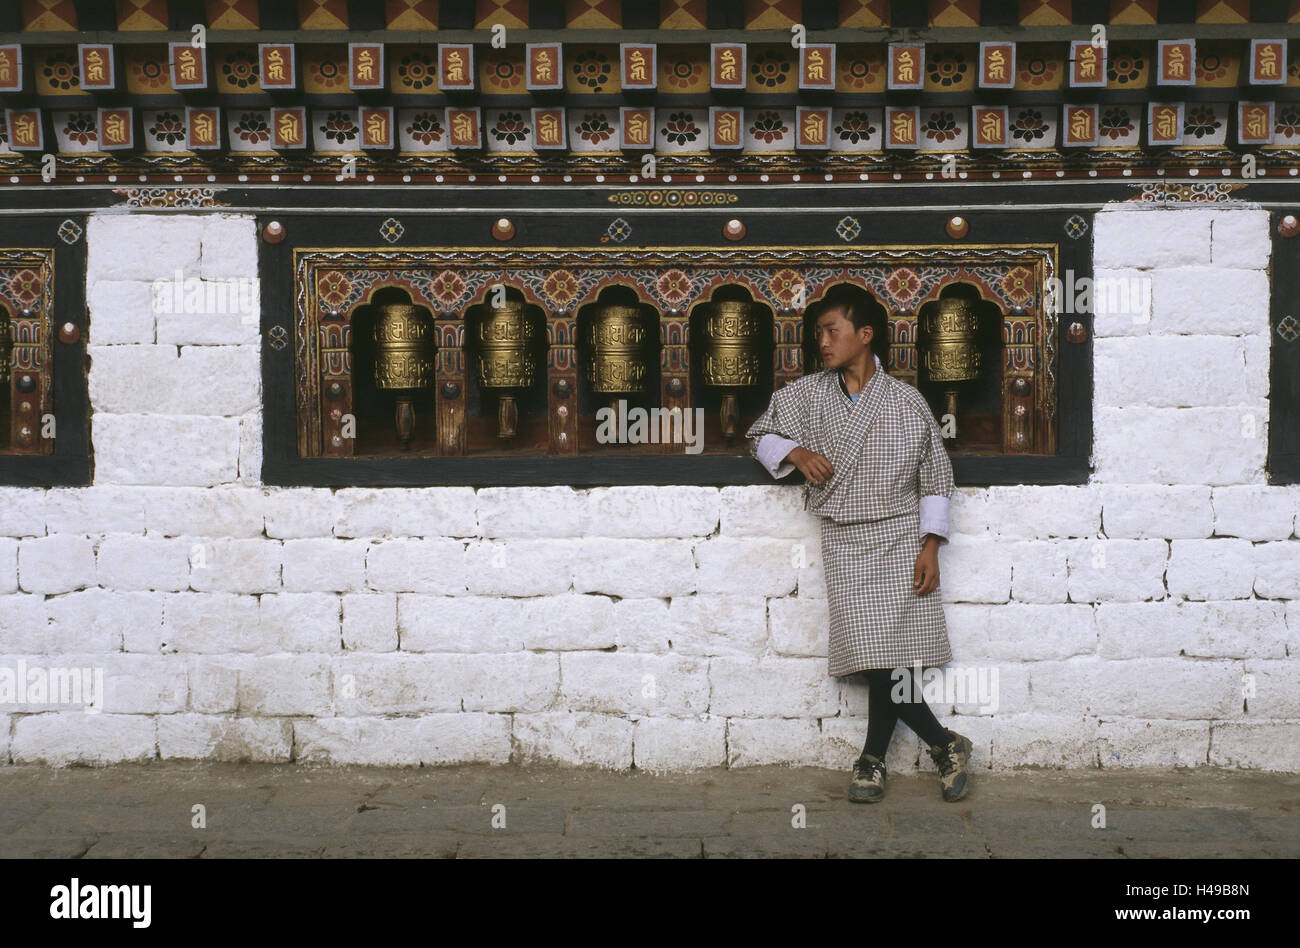 Bhutan, Thimphu, cloister fortress Dzong, man, prayer mills, Asia, the Himalayas, kingdom, Westbhutan, capital, seat of government, cloister, cloister facility, cloister castle, fortress, structure, building, historically, culture, Gho, Buddhist, religion Stock Photo